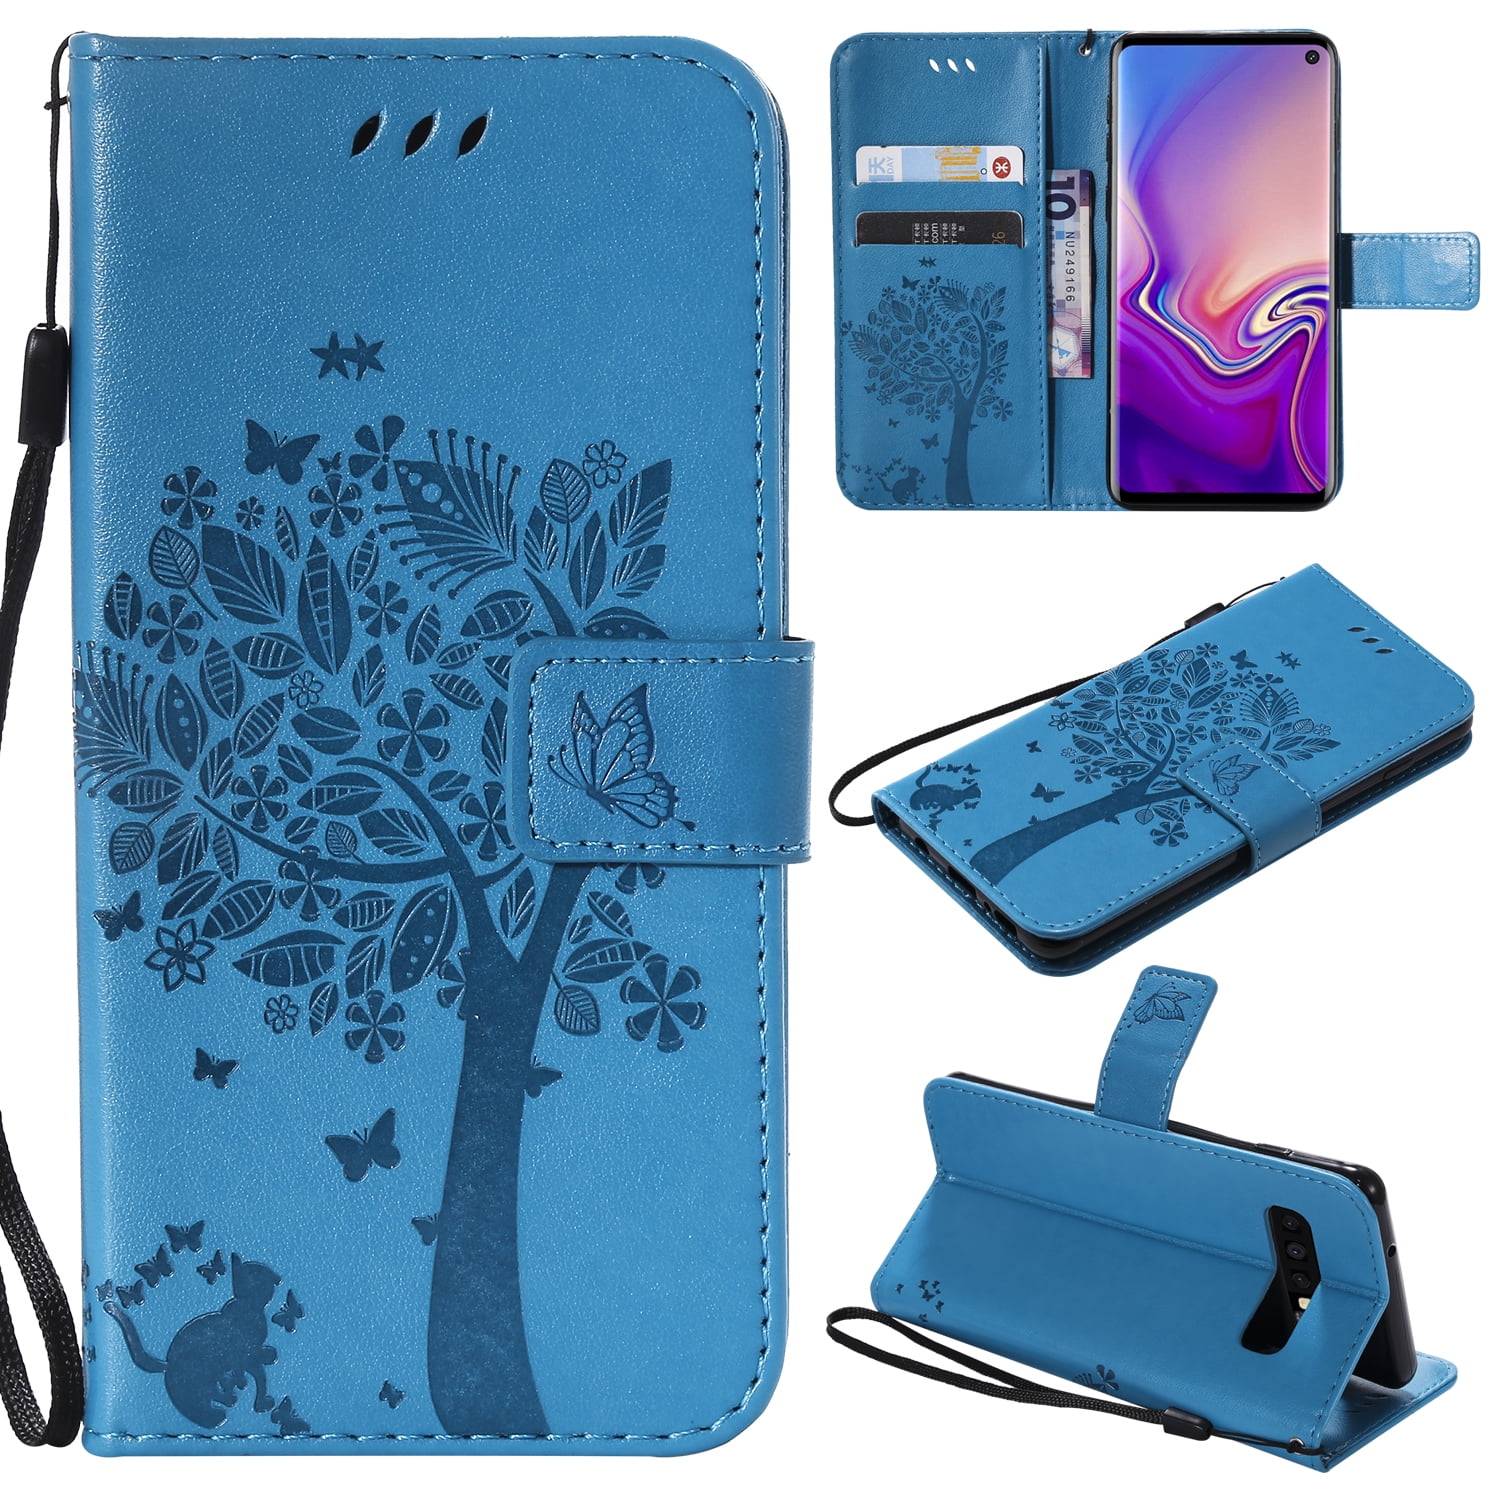 Galaxy S10 Case,Samsung S10 Case,Wallet Case,PU Leather Case Floral Tree Cat Embossed Purse with Kickstand Flip Cover Card Holders Hand Strap for Samsung Galaxy S10 Brown 